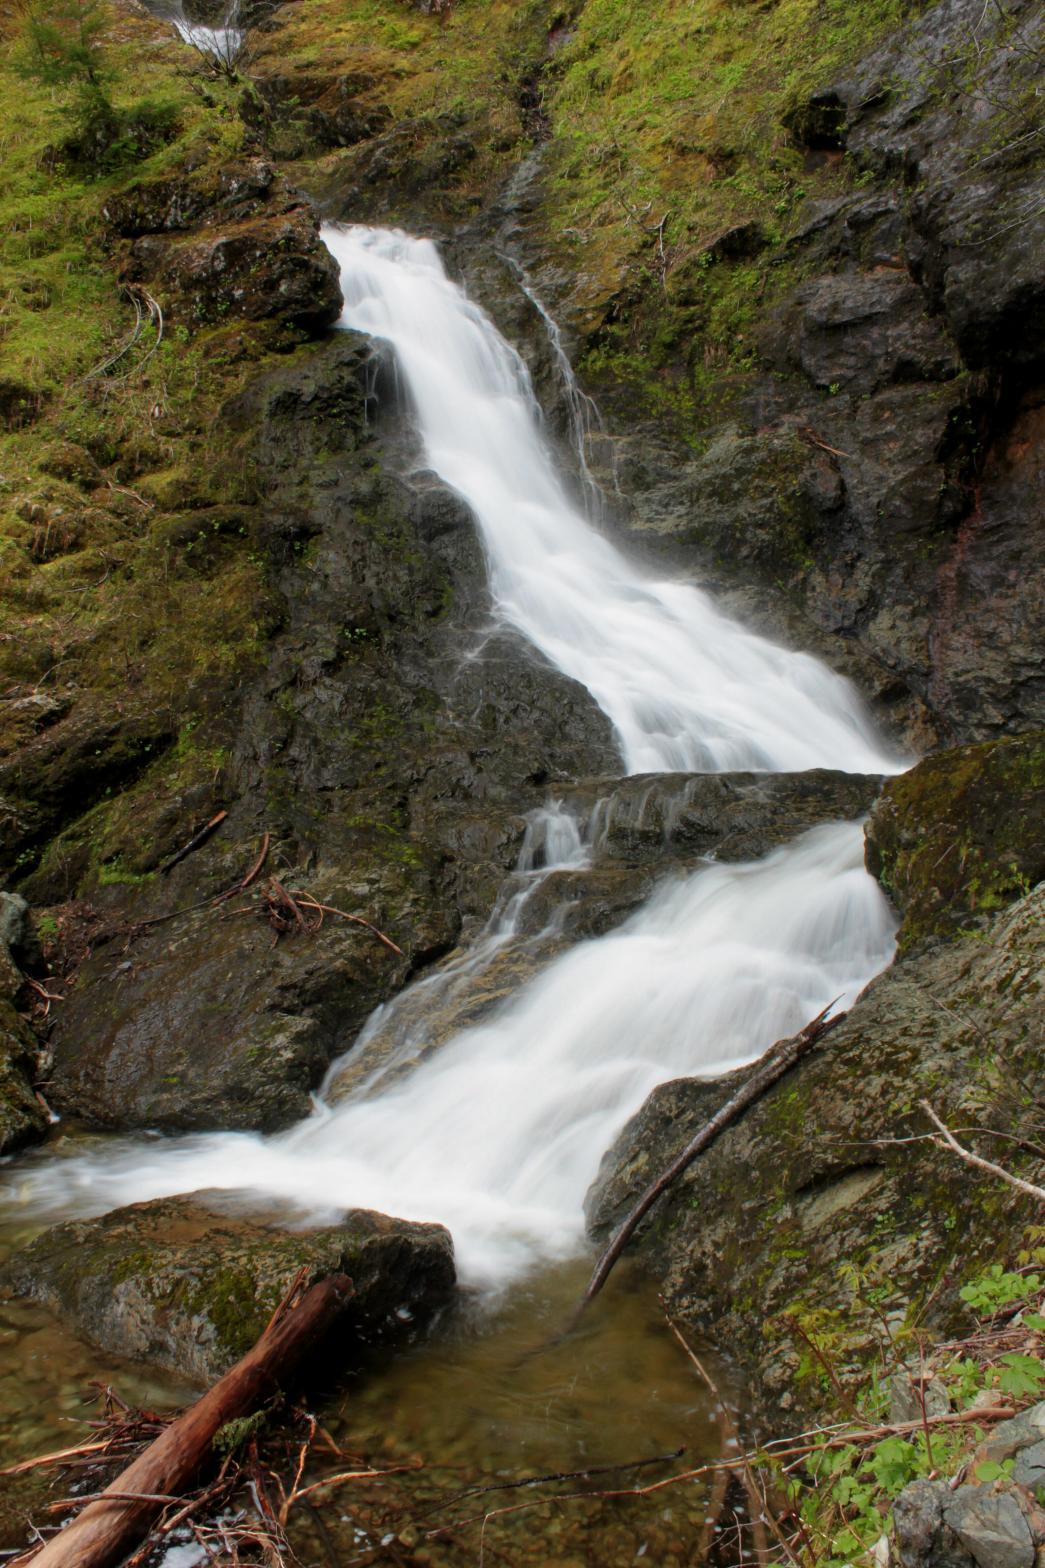 Part of the cascading middle section